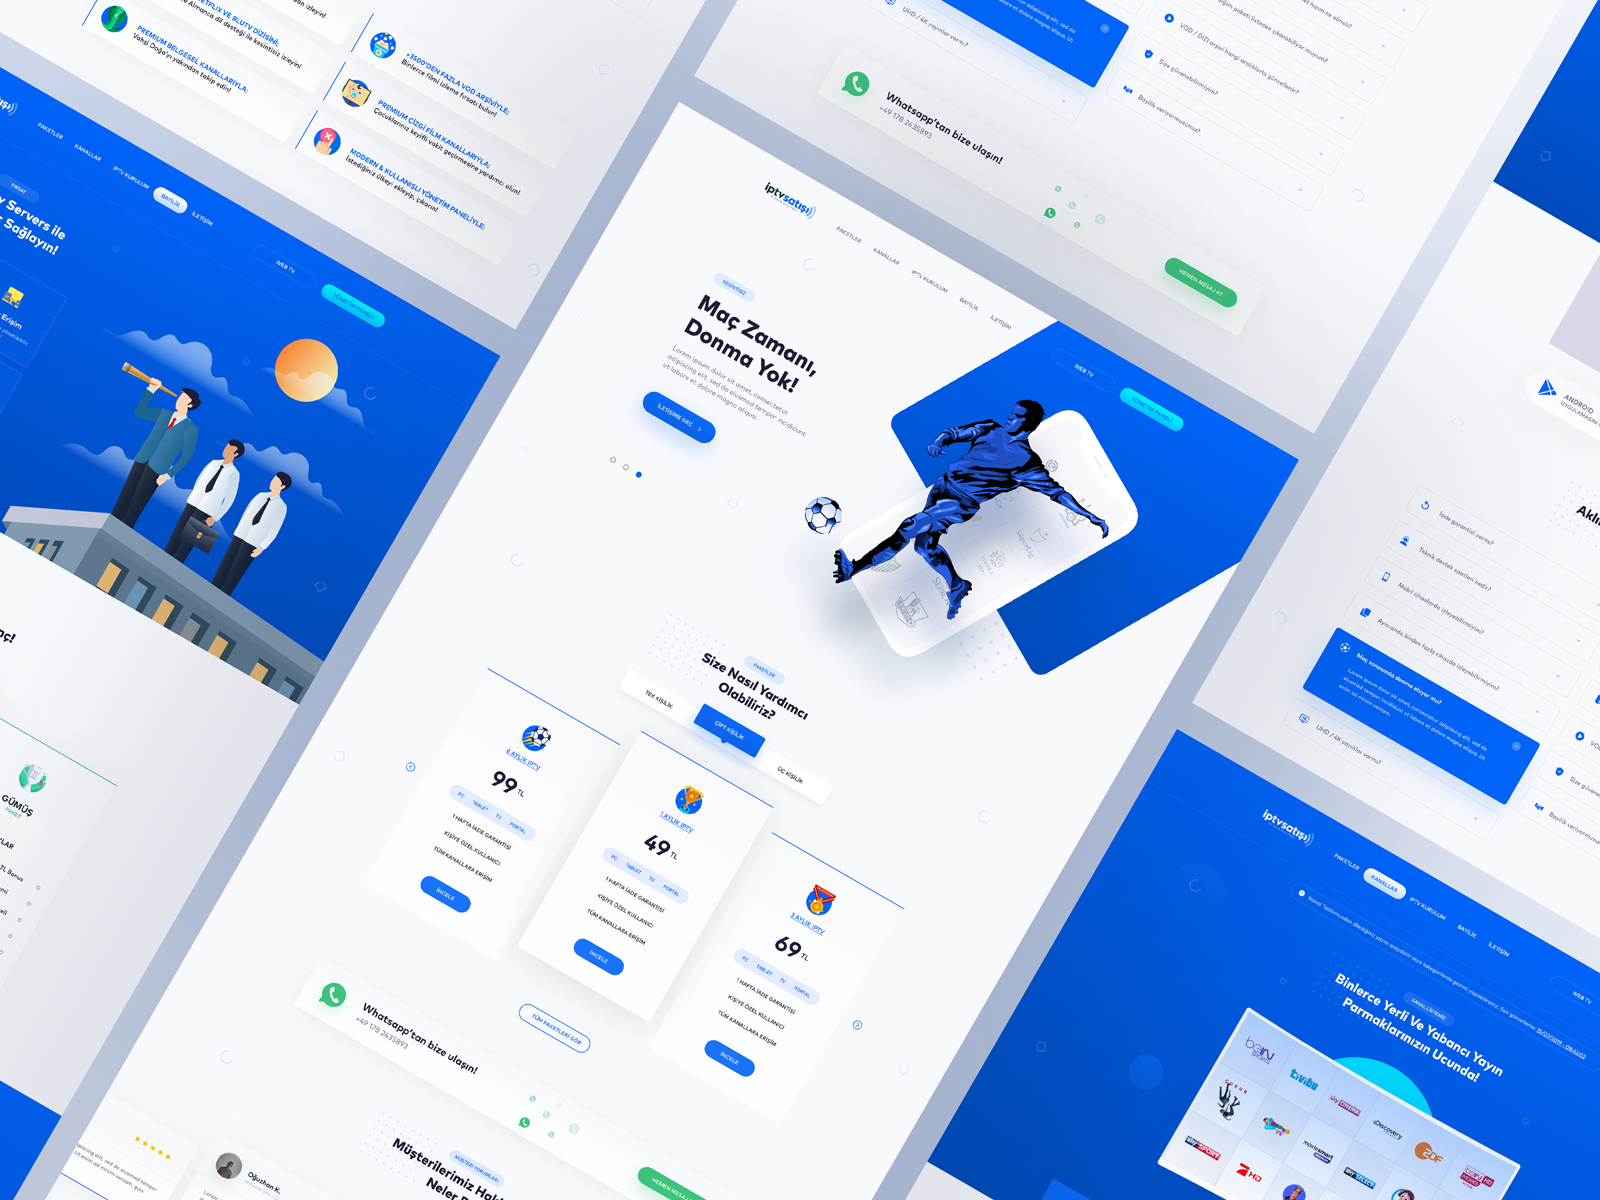 iptv-landing-page-all-pages-by-er-ad-ba-ba-on-dribbble